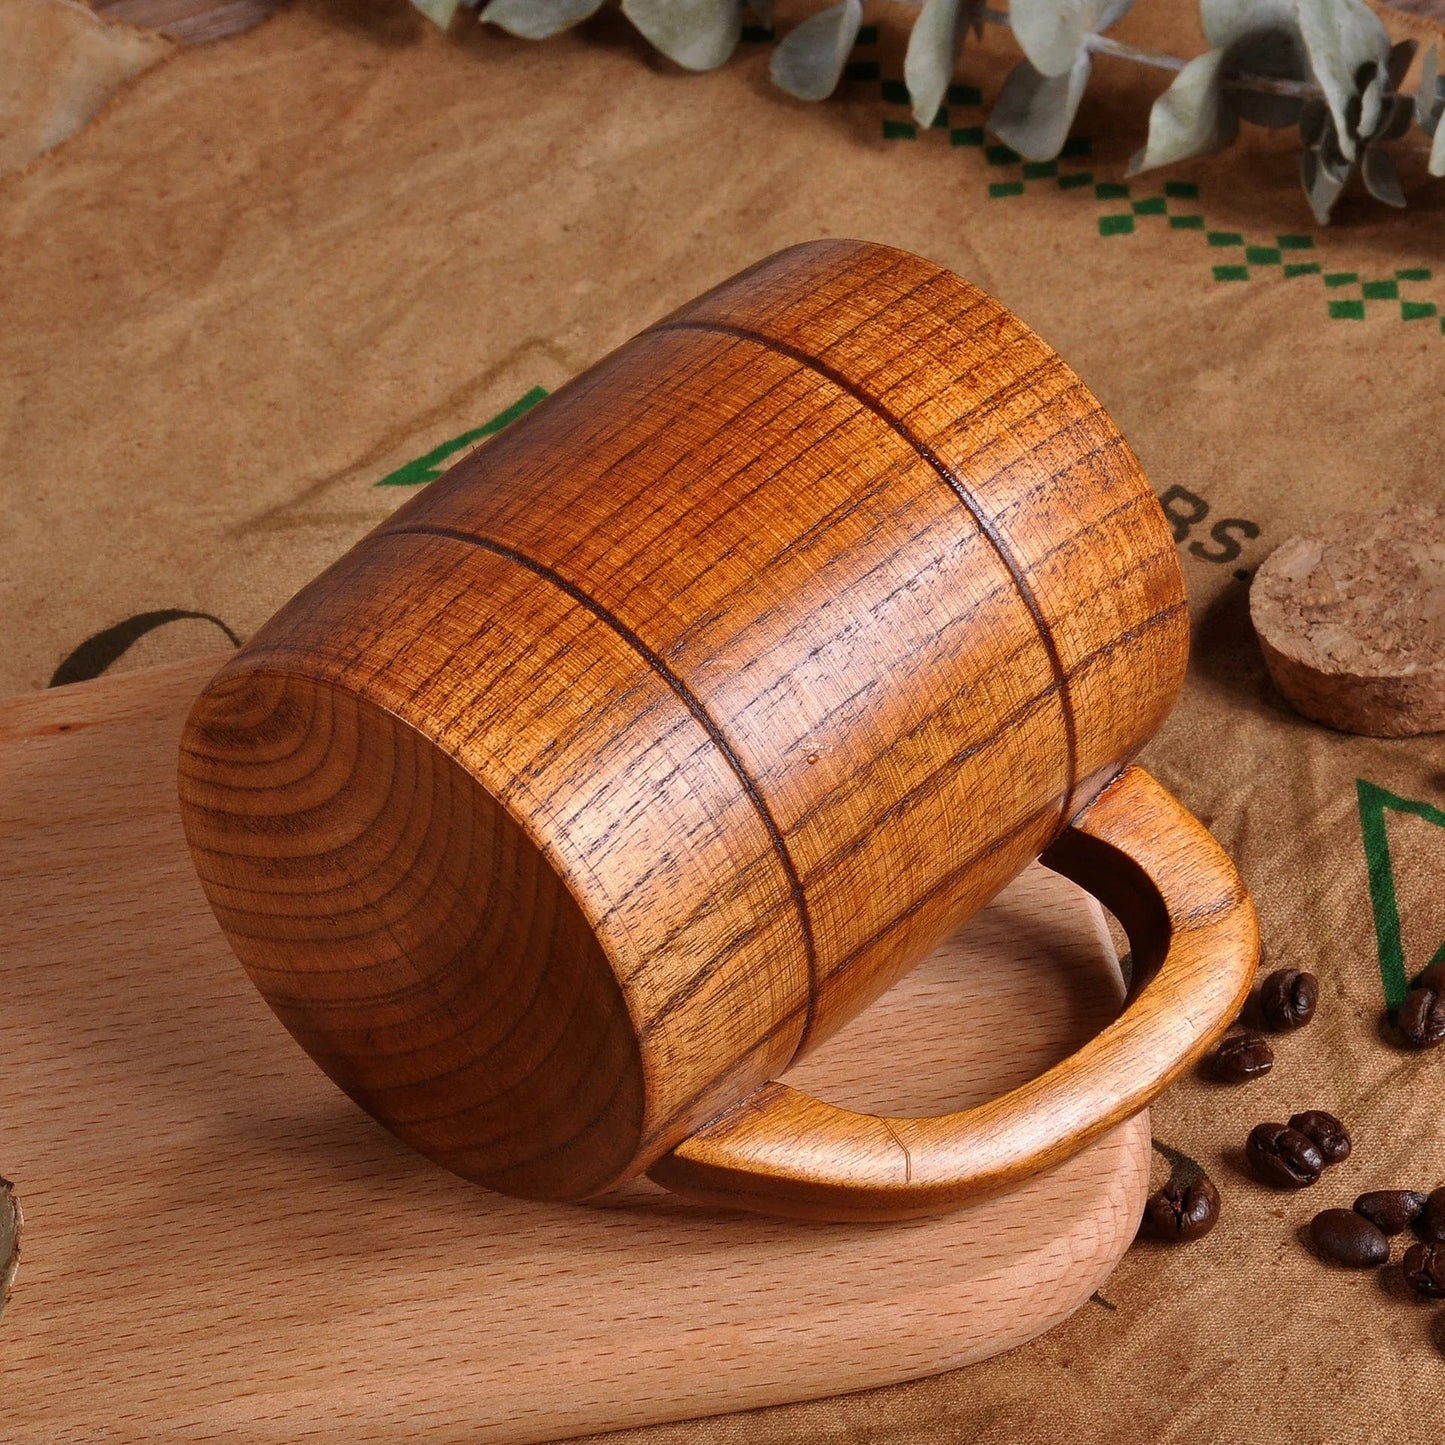 Simple Wooden Cups